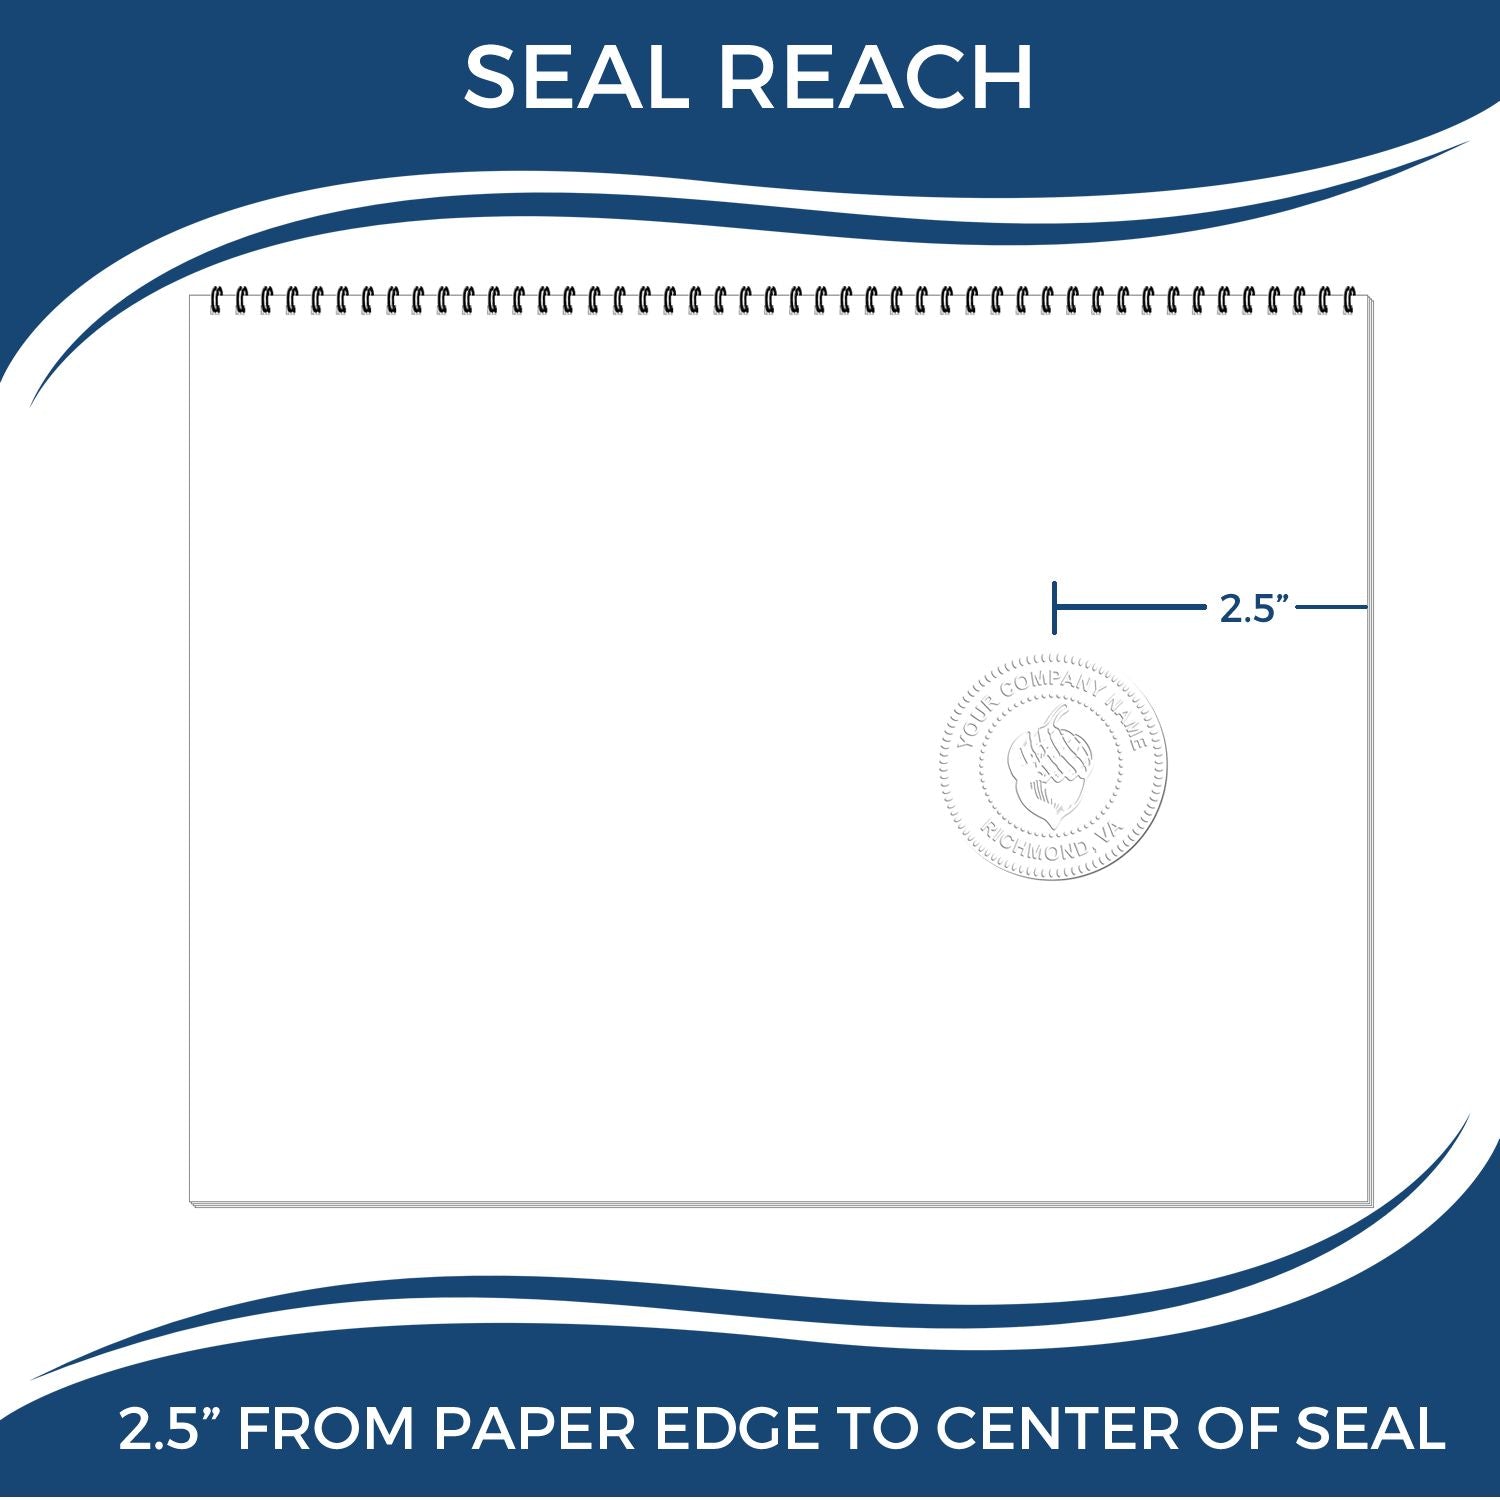 An infographic showing the seal reach which is represented by a ruler and a miniature seal image of the State of Maine Long Reach Architectural Embossing Seal